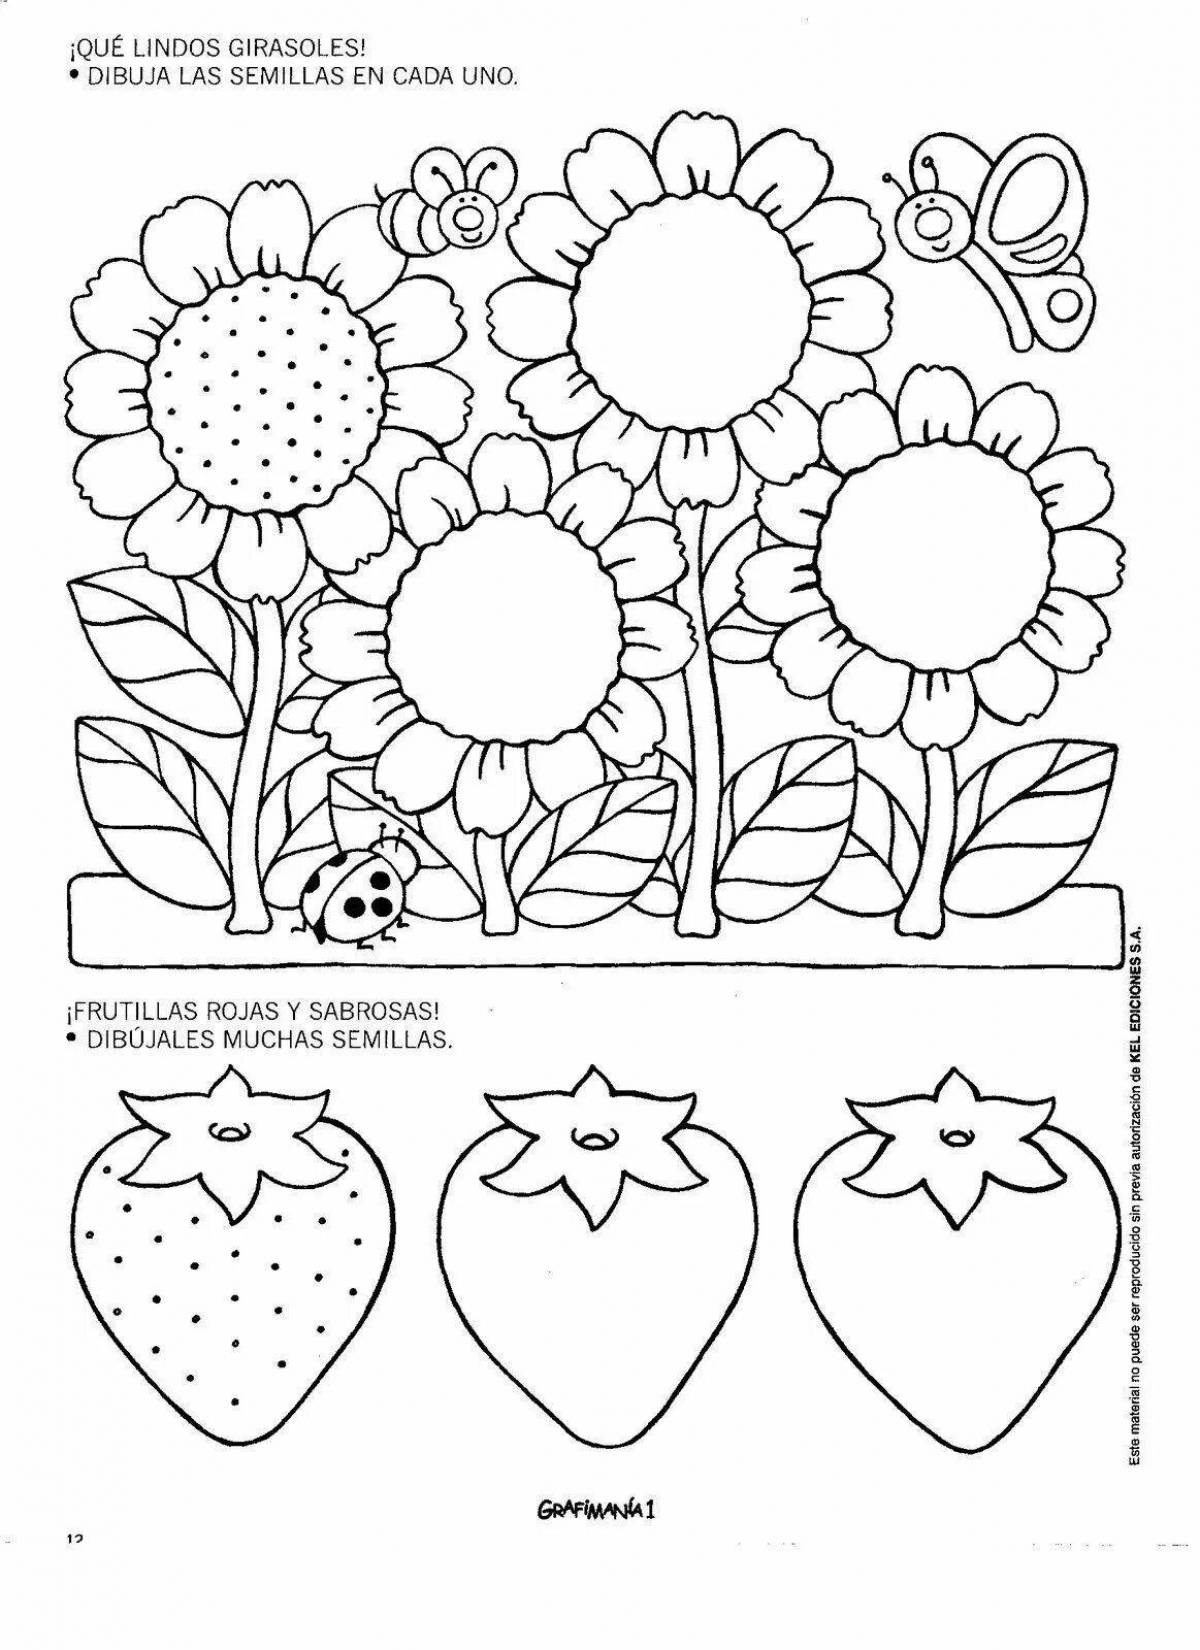 Colorful coloring book for the development of fine motor skills